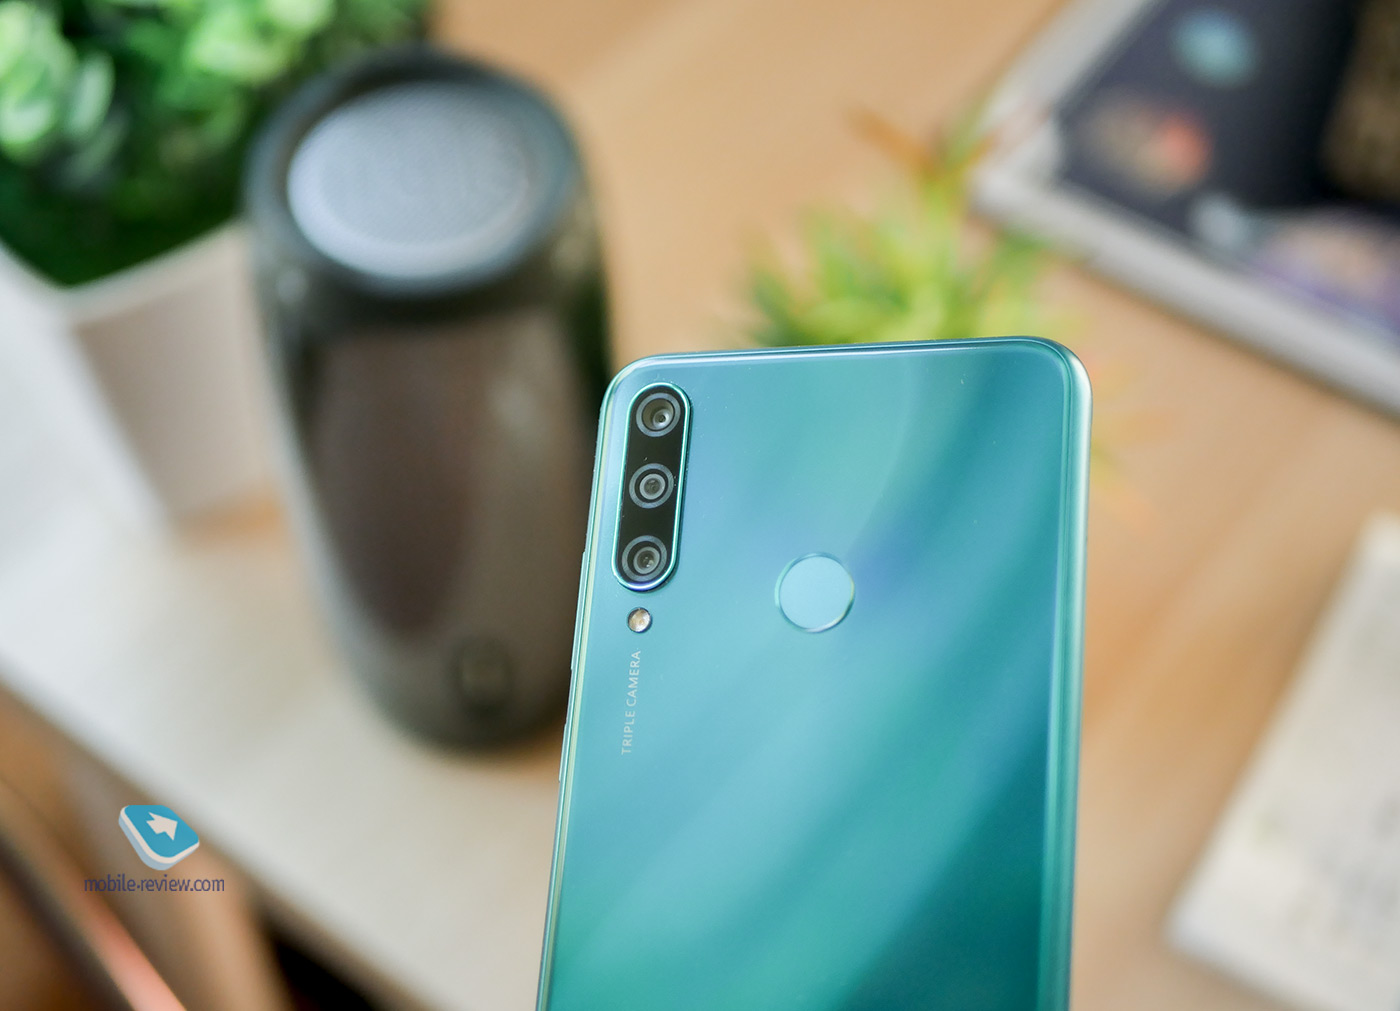 Review-comparison of Huawei Y8p and Y6p